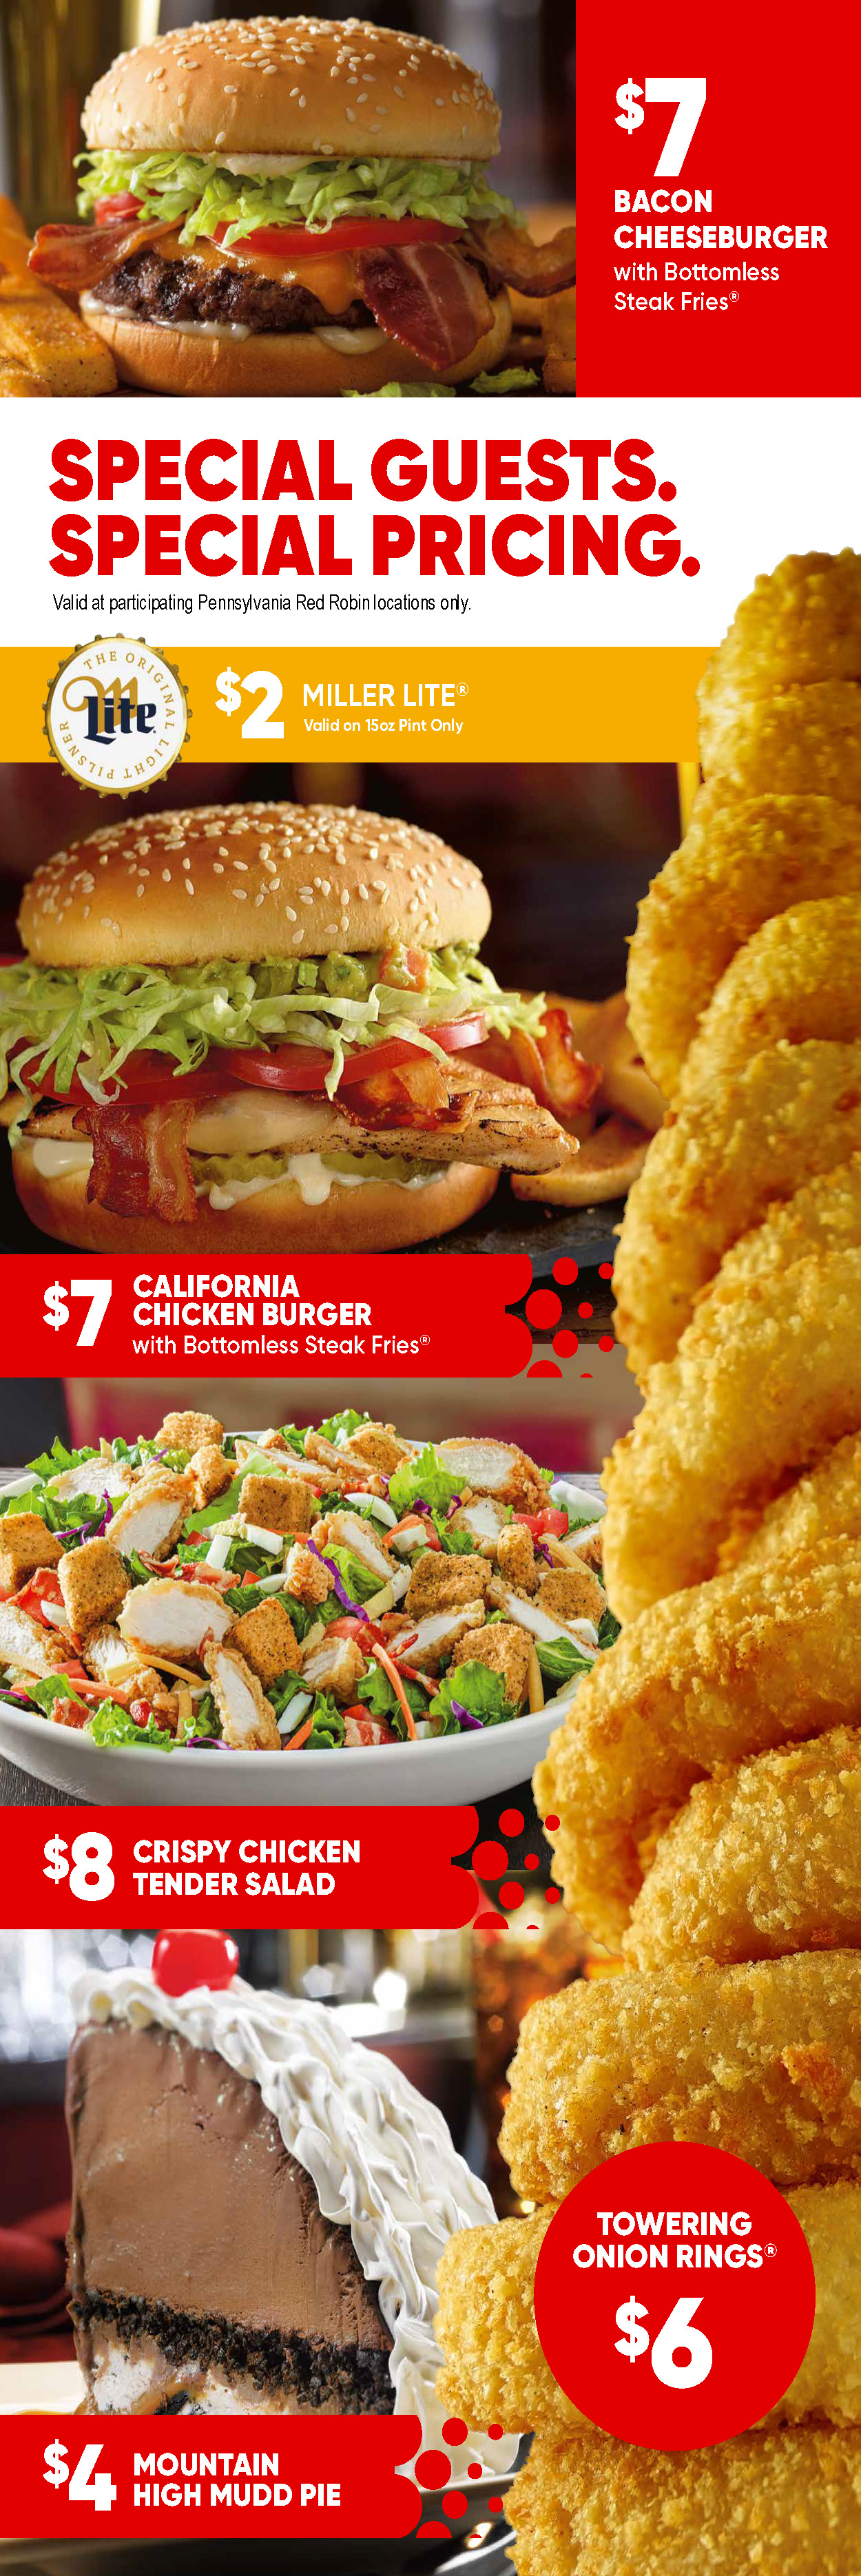 Guest Appreciation Week Menu with 5 select menu items at a discounted price: $7 Bacon Cheeseburger, $7 California Chicken Burger, $8 Crispy Chicken Tender Salad, $4 Mountain High Mudd Pie & $6 Towering Onion Rings